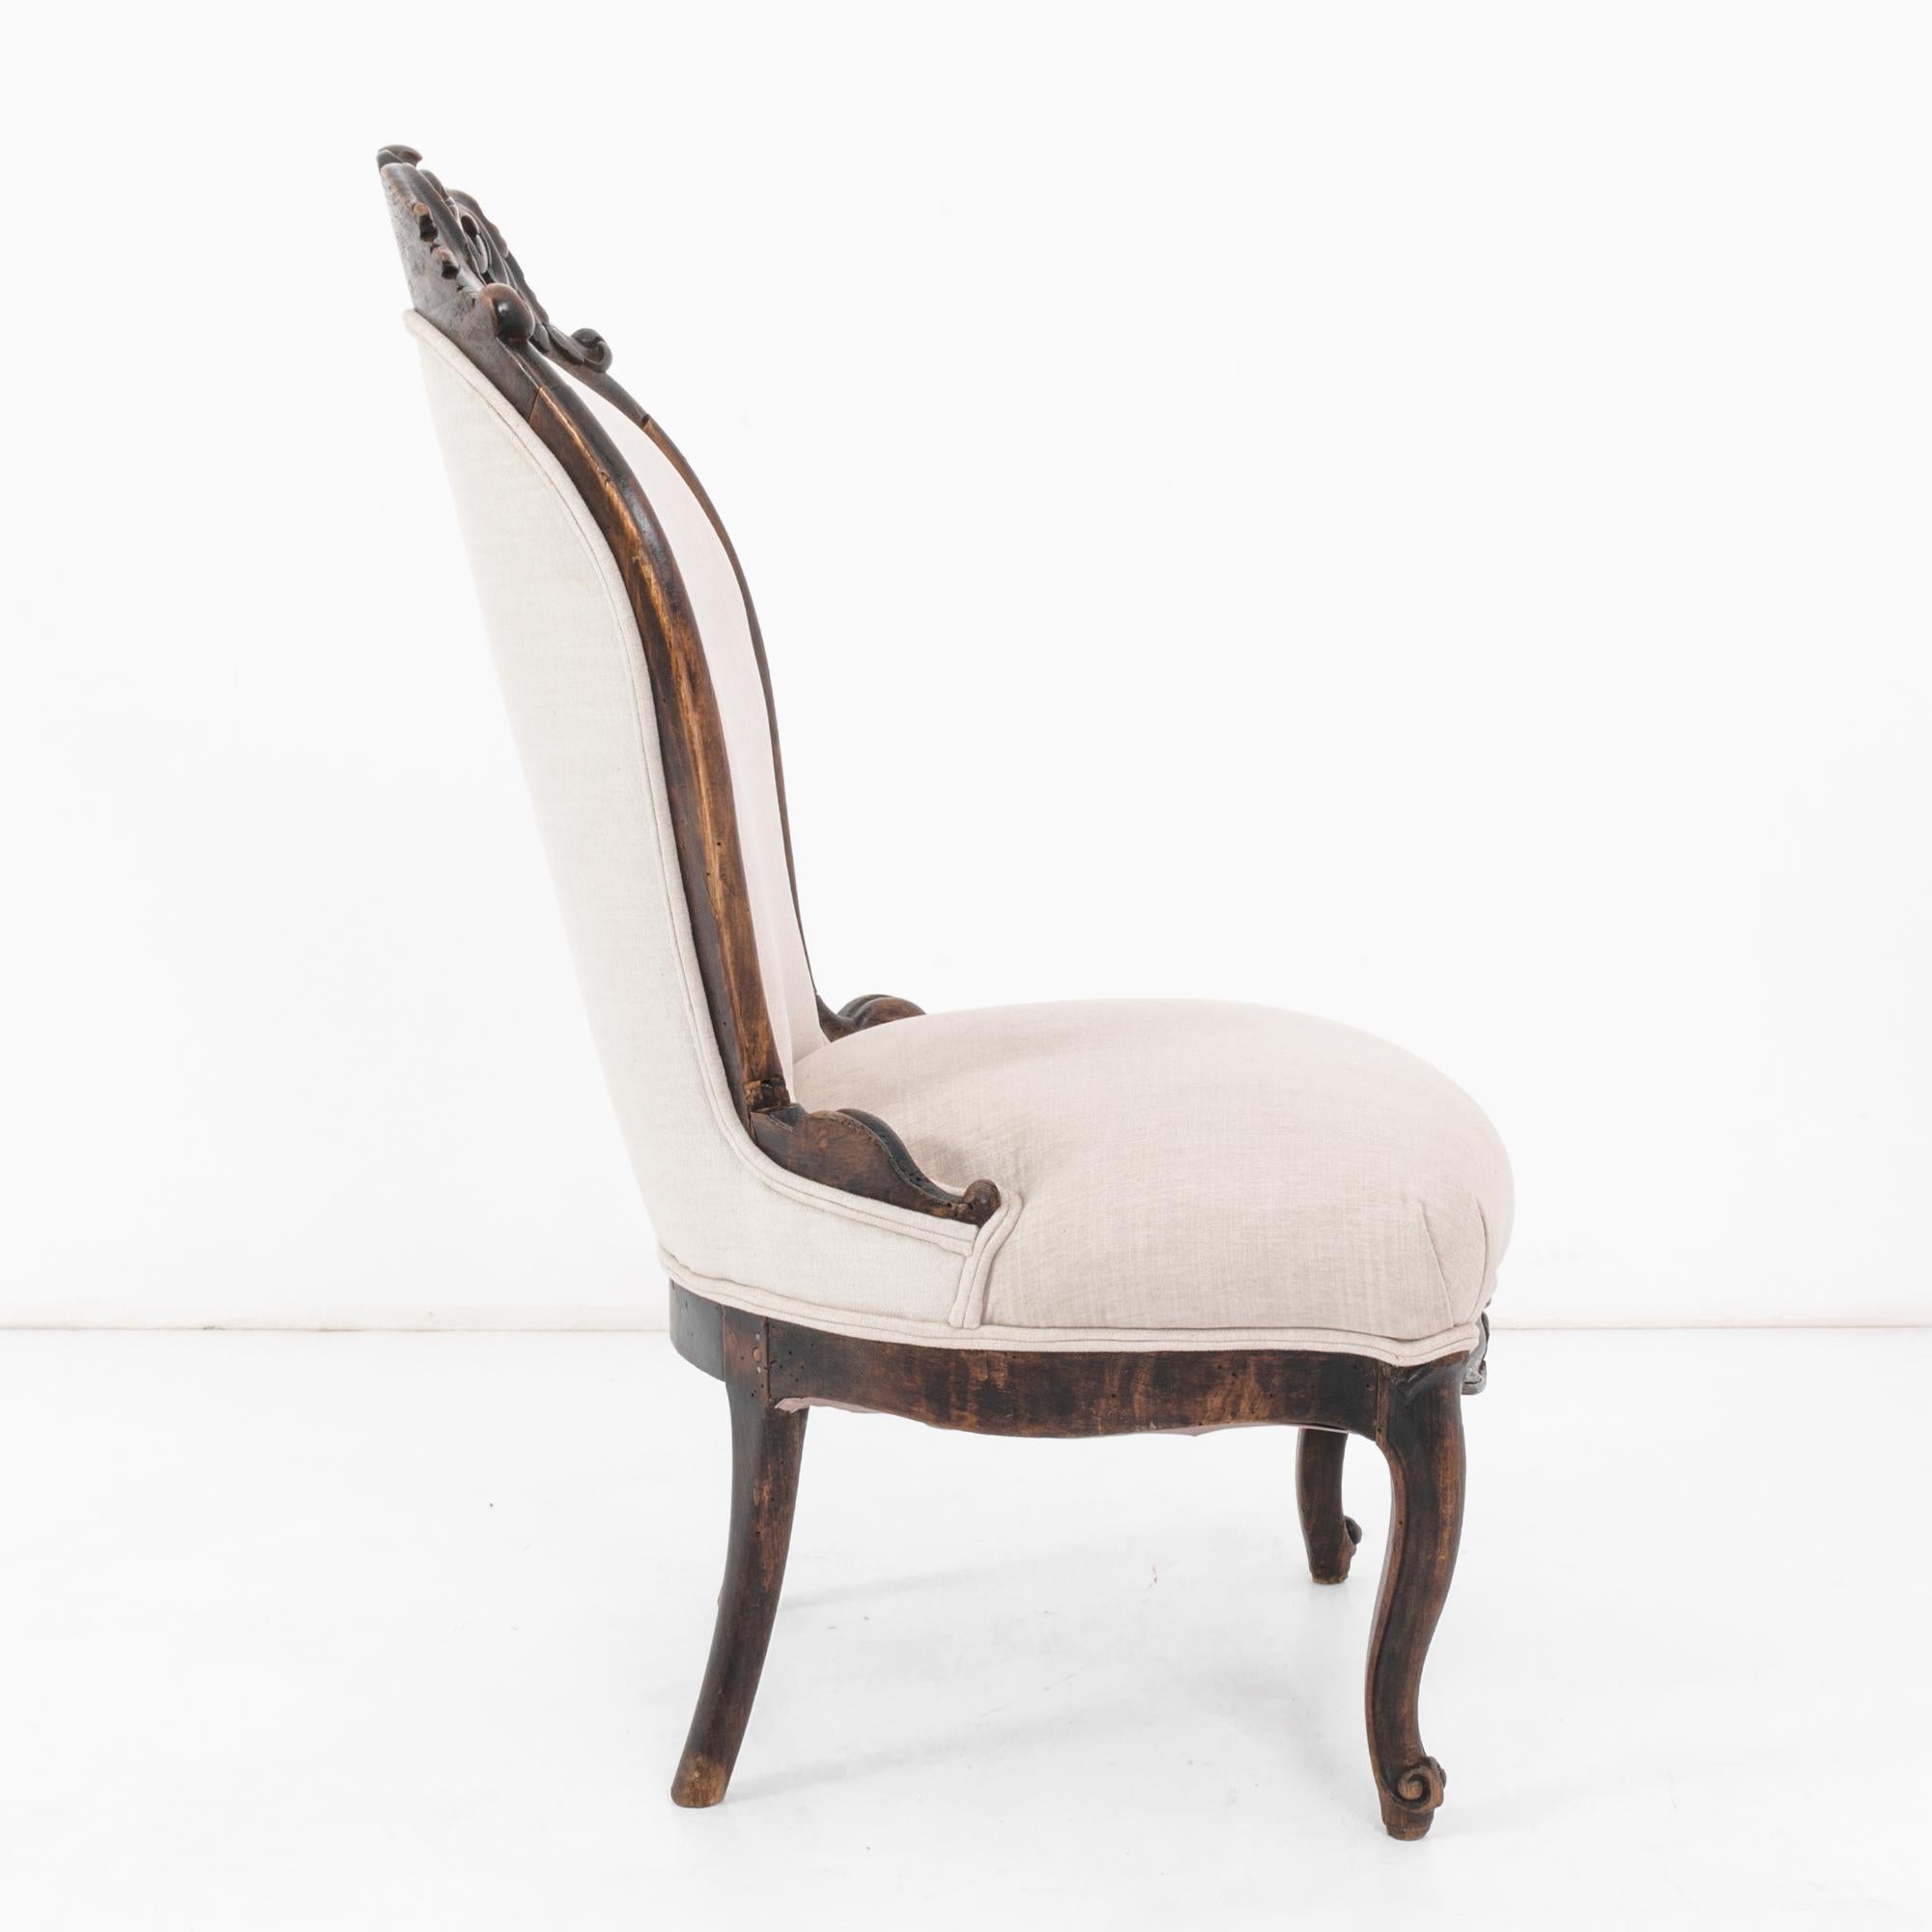 1880s French Wooden Chair with Upholstered Seat and Back For Sale 6